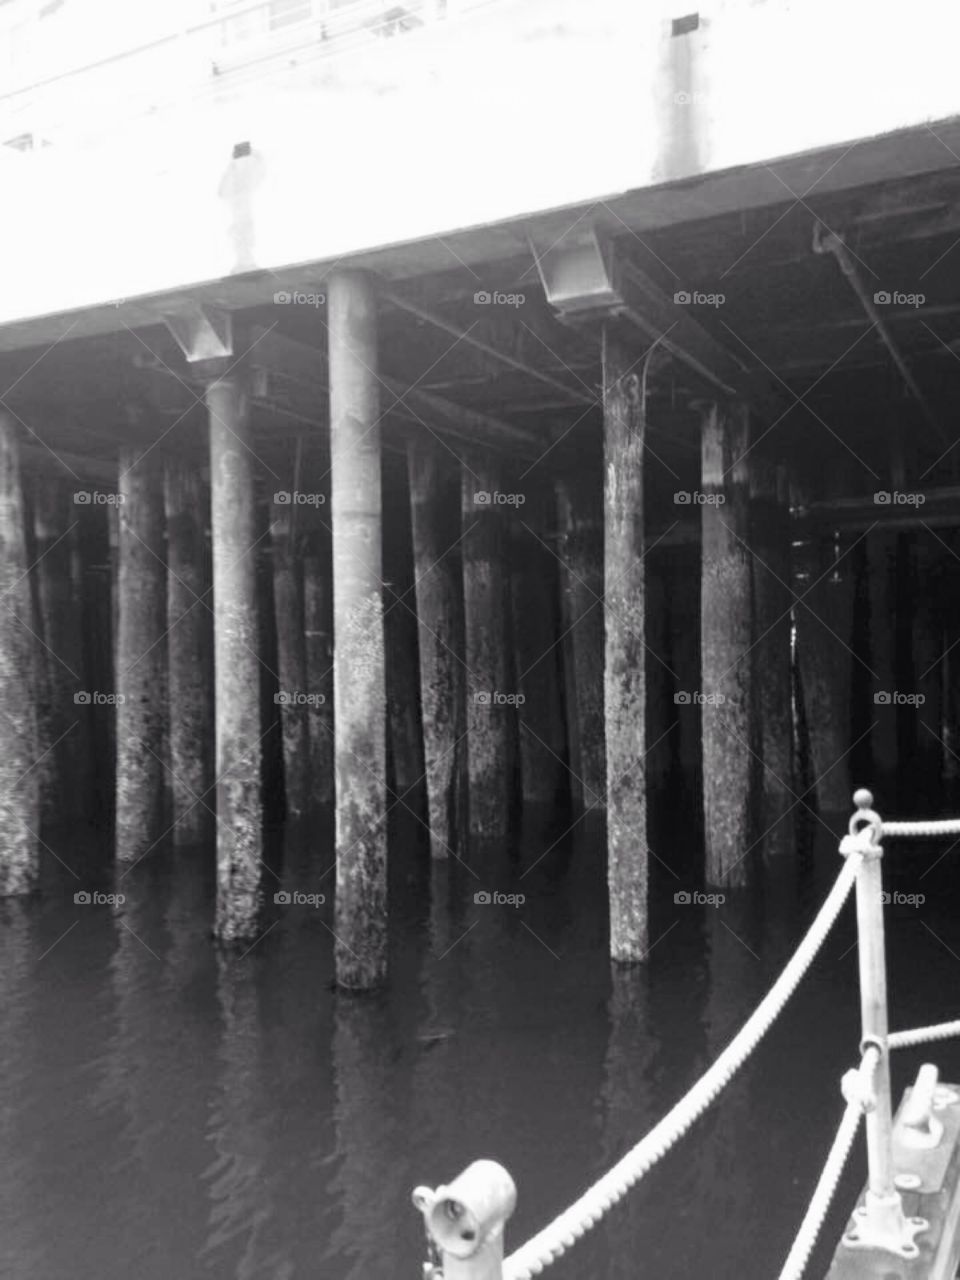 Under the dock